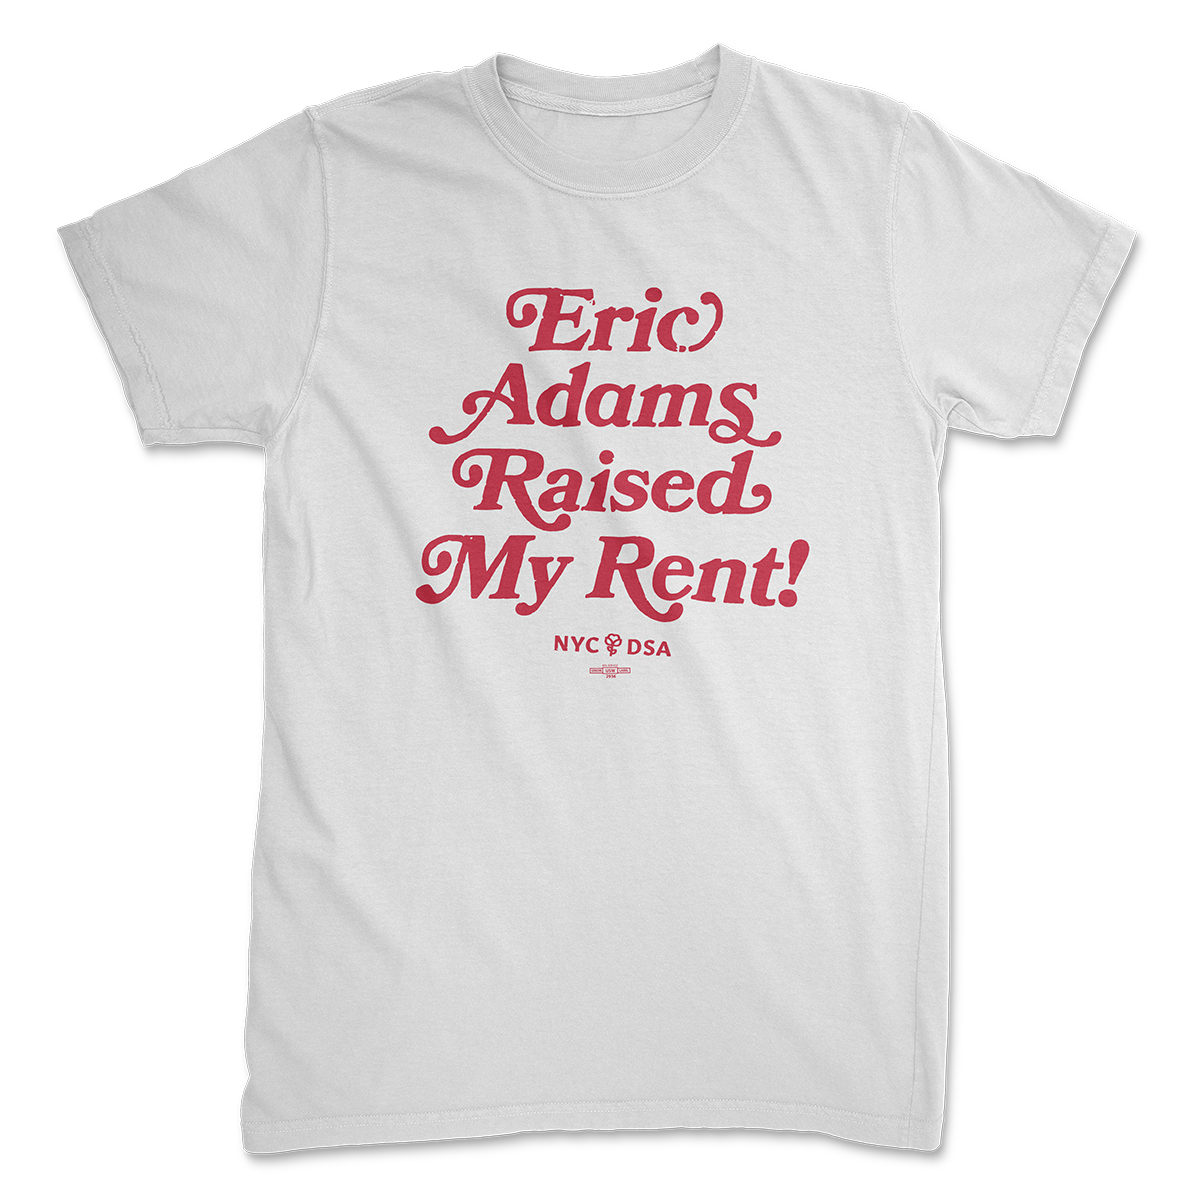 Eric Adams Raised My Rent white t-shirt with red lettering. NYC-DSA logo at the bottom